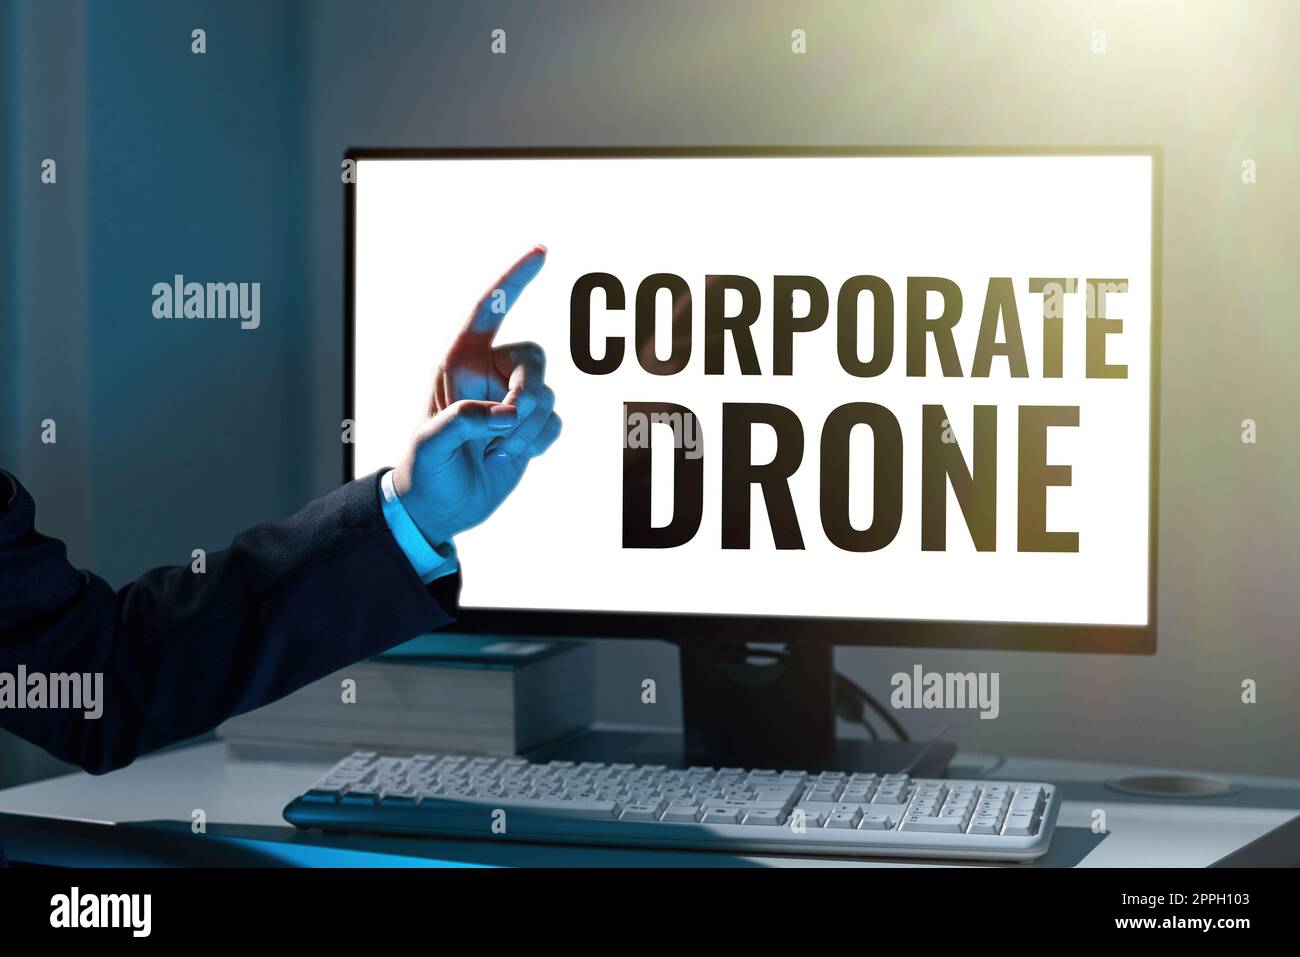 Text showing inspiration Corporate Drone. Business showcase unmanned aerial vehicles used to monitor business vicinity Stock Photo